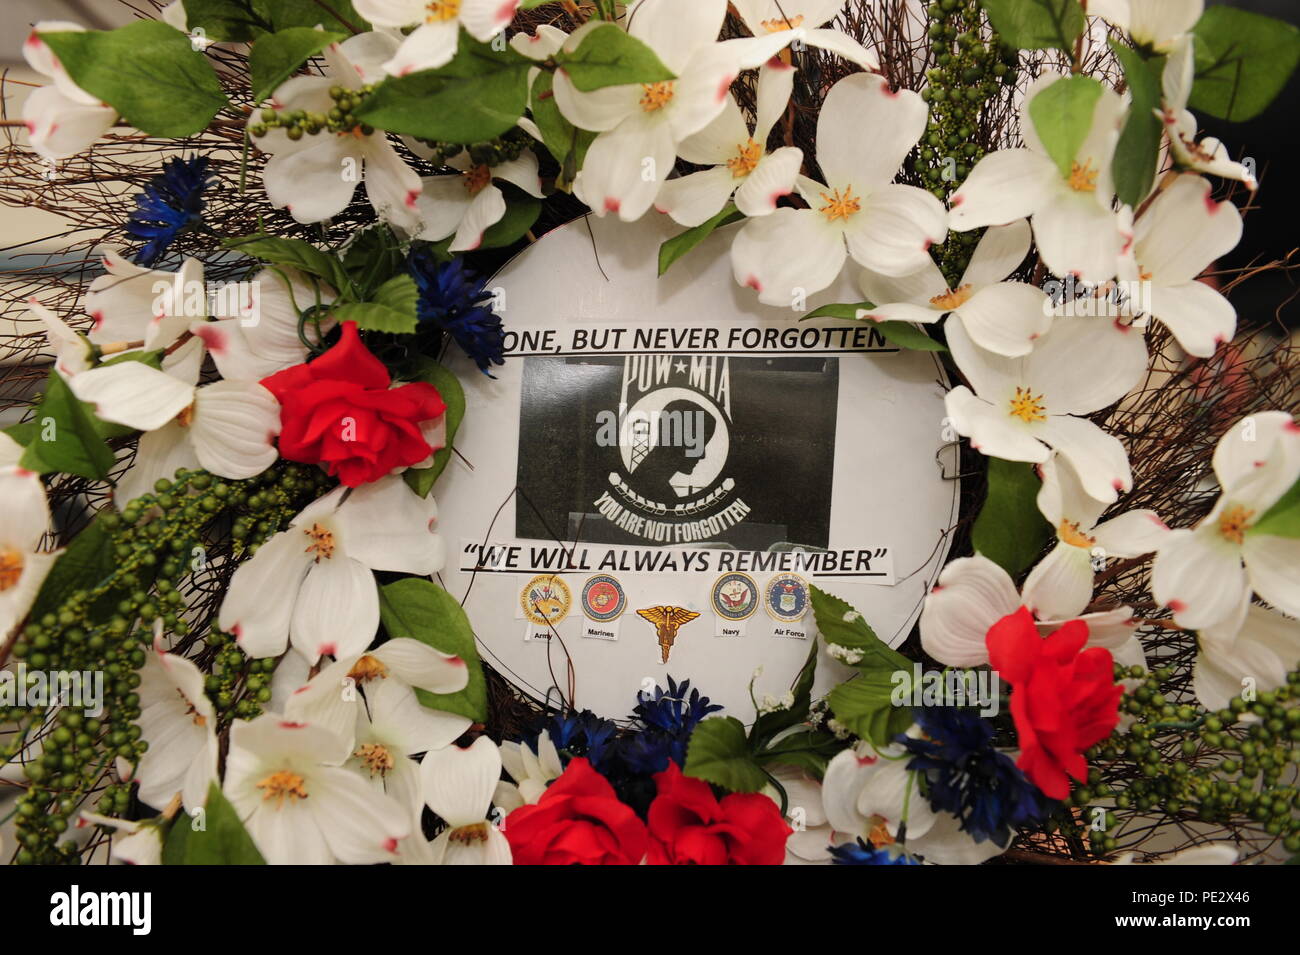 A wreath honoring prisoners of war and those who are missing in action sits on display during a POW/MIA Remembrance Ceremony at the Pima Air and Space Museum in Tucson, Ariz., Sept. 18, 2015. The wreath was crafted and donated by Ms. Helen Glass, a U.S. Navy World War II veteran who served in Women Accepted for Volunteer Emergency Service. (U.S. Air Force photo by Senior Airman Cheyenne A. Powers/ Released) Stock Photo